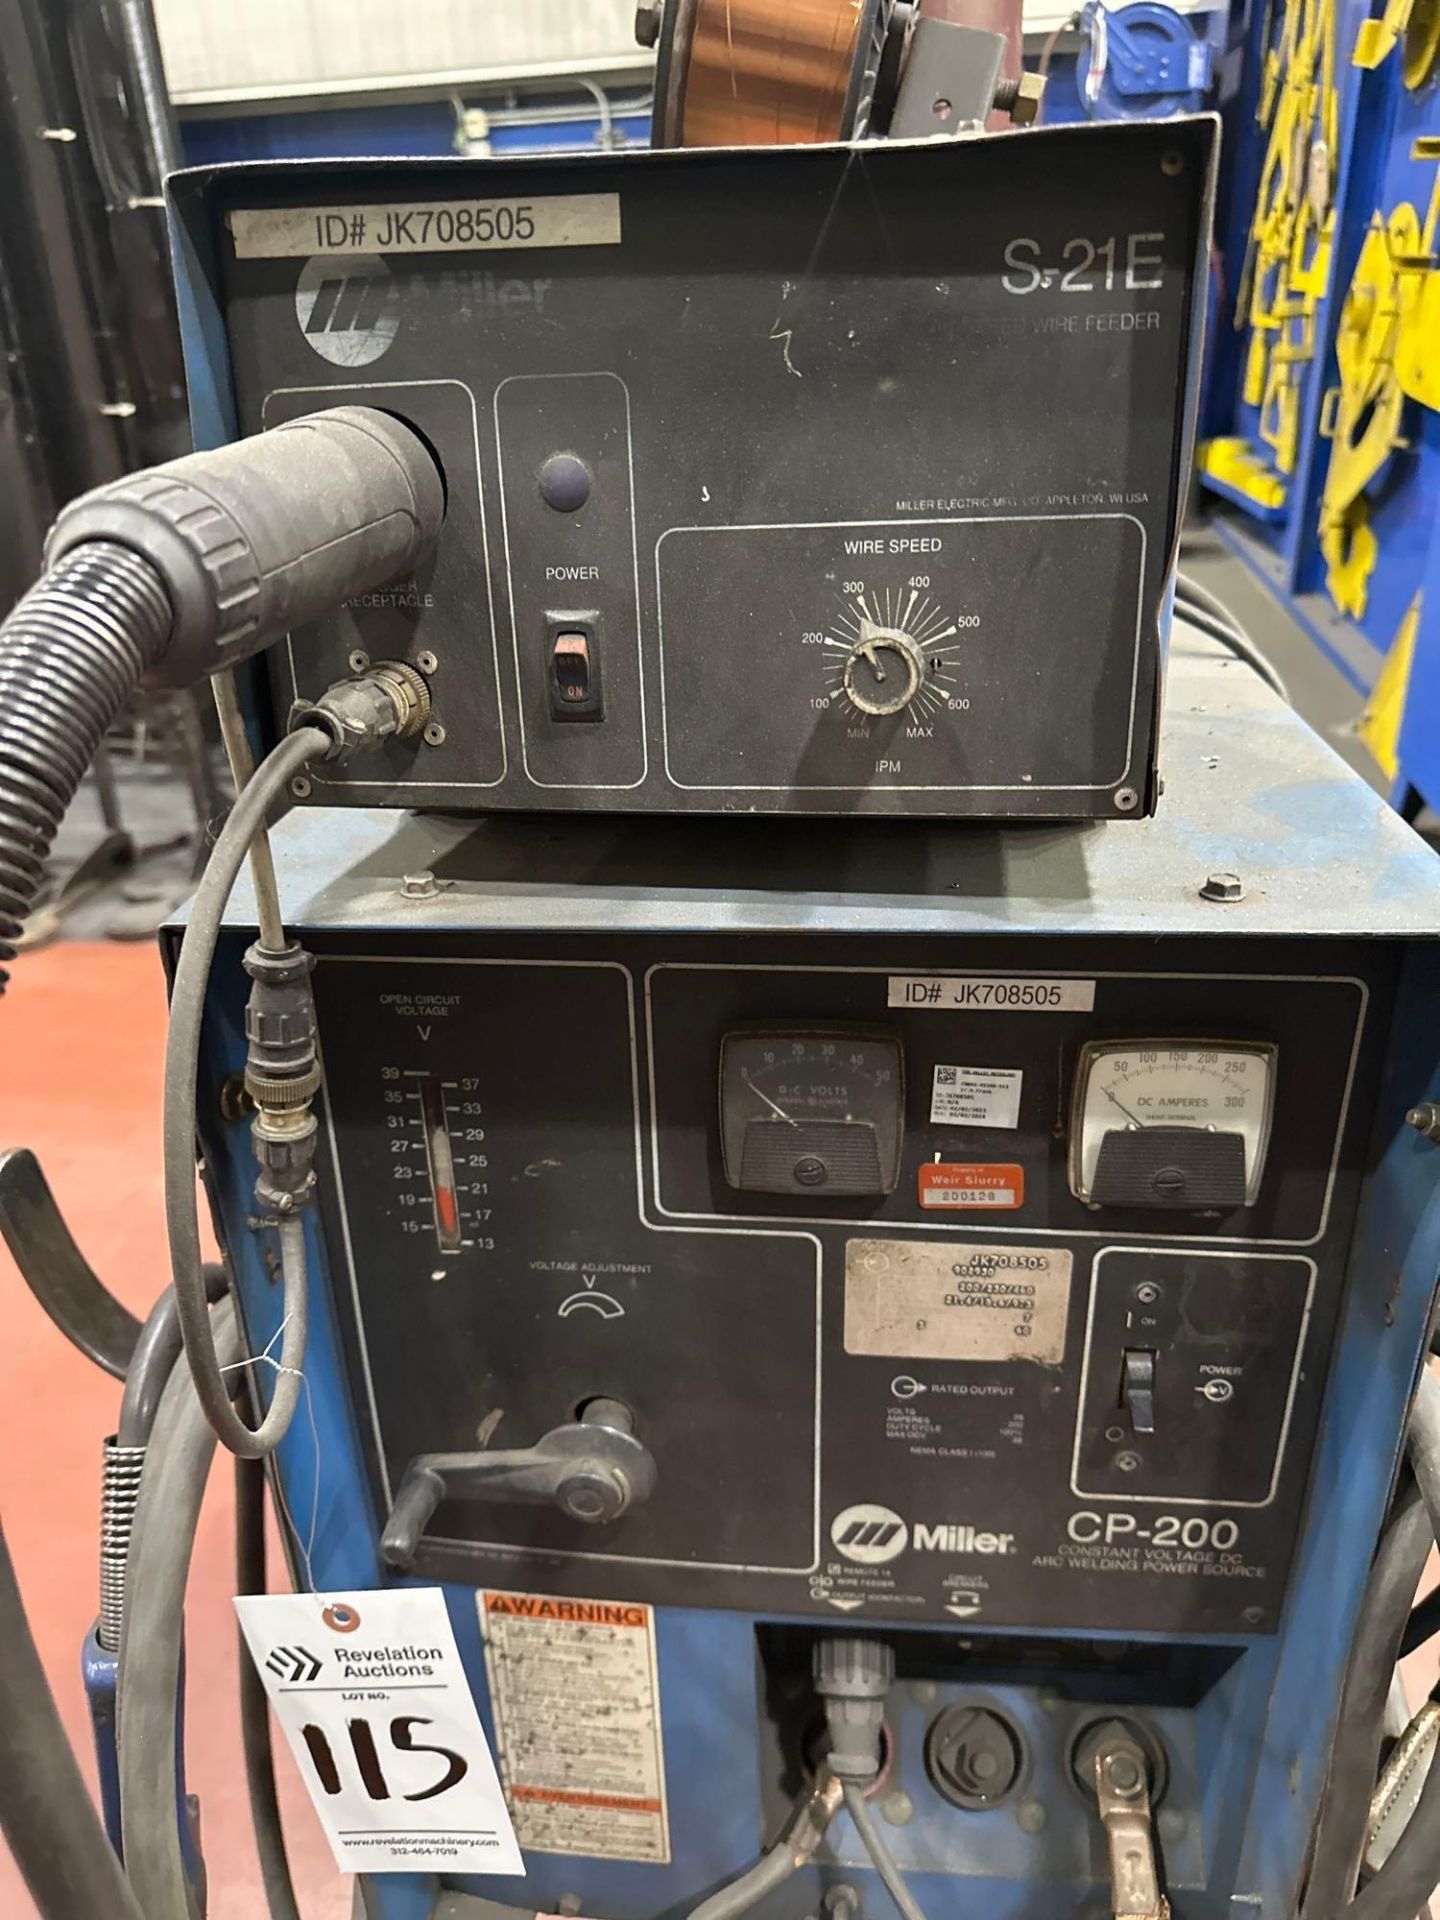 MILLER CP-200 MIG WELDER WITH S-21E WIRE FEEDER - Image 4 of 7